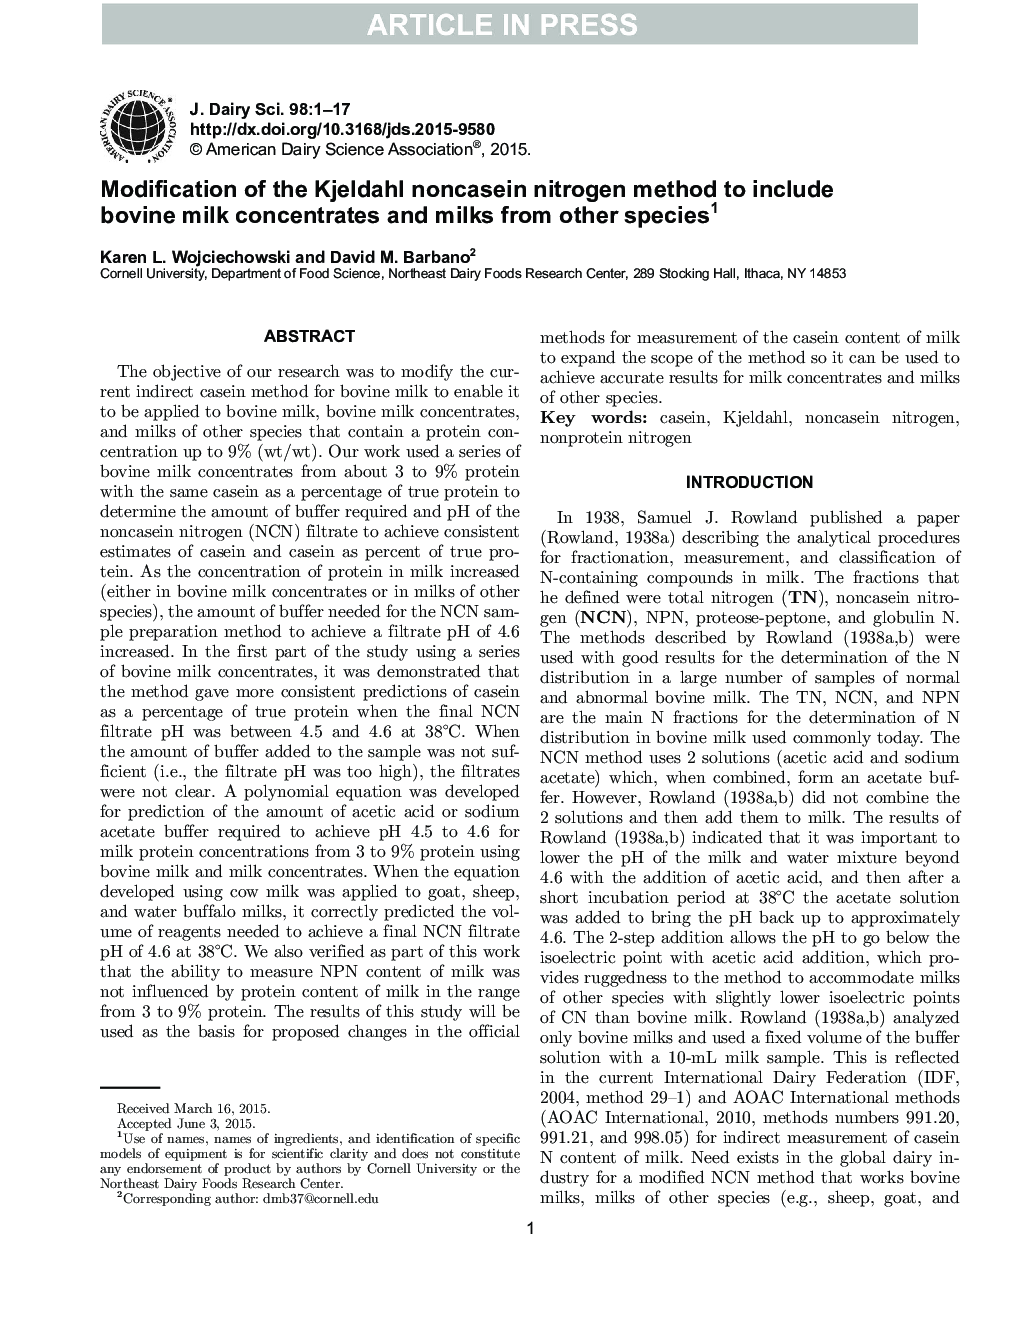 Modification of the Kjeldahl noncasein nitrogen method to include bovine milk concentrates and milks from other species1